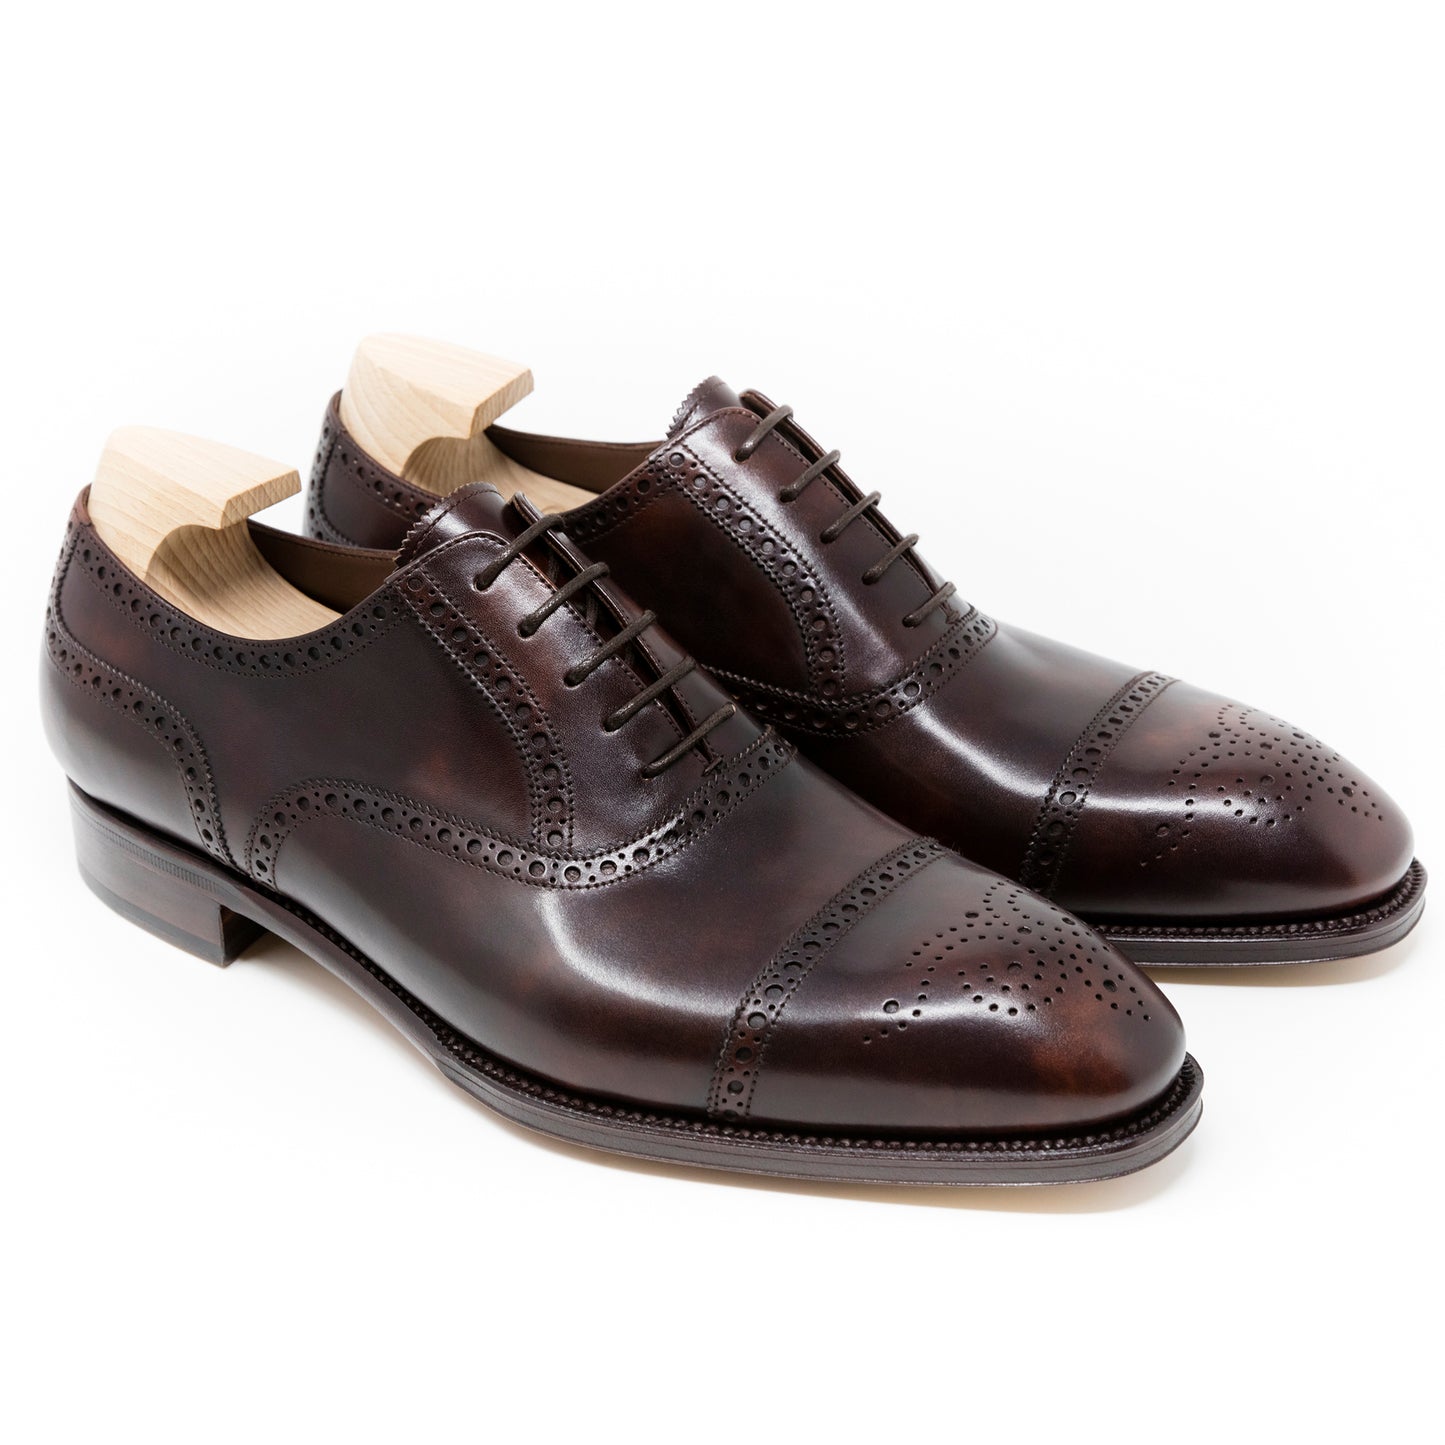 TLB Mallorca leather shoes 555 / ALAN / MUSEUM CALF BROWN